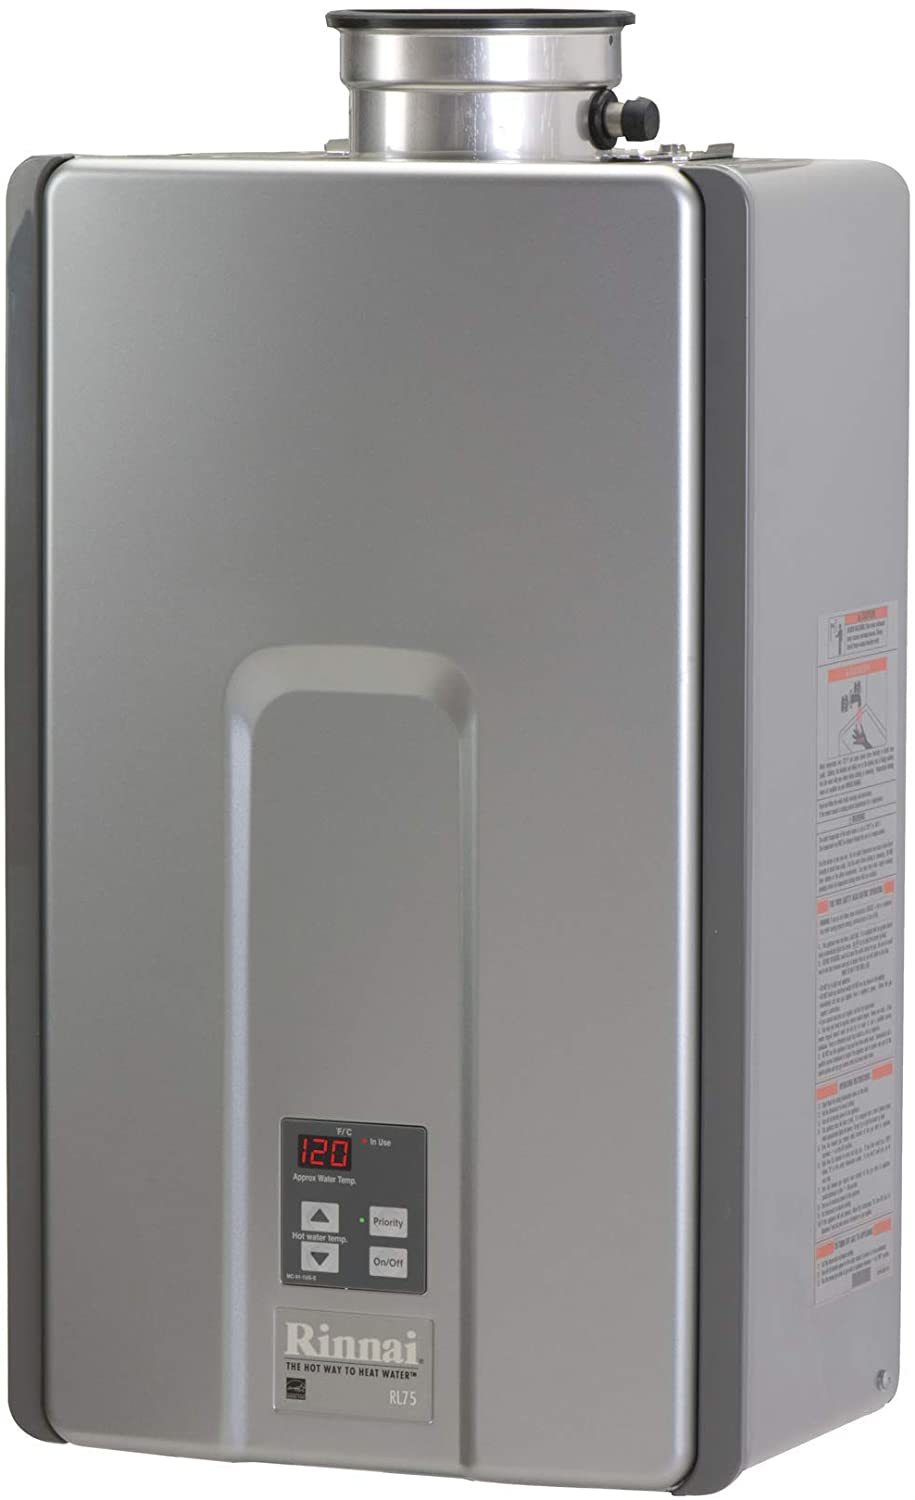 Rinnai RL75iN Natural Gas Tankless Water Heater Review